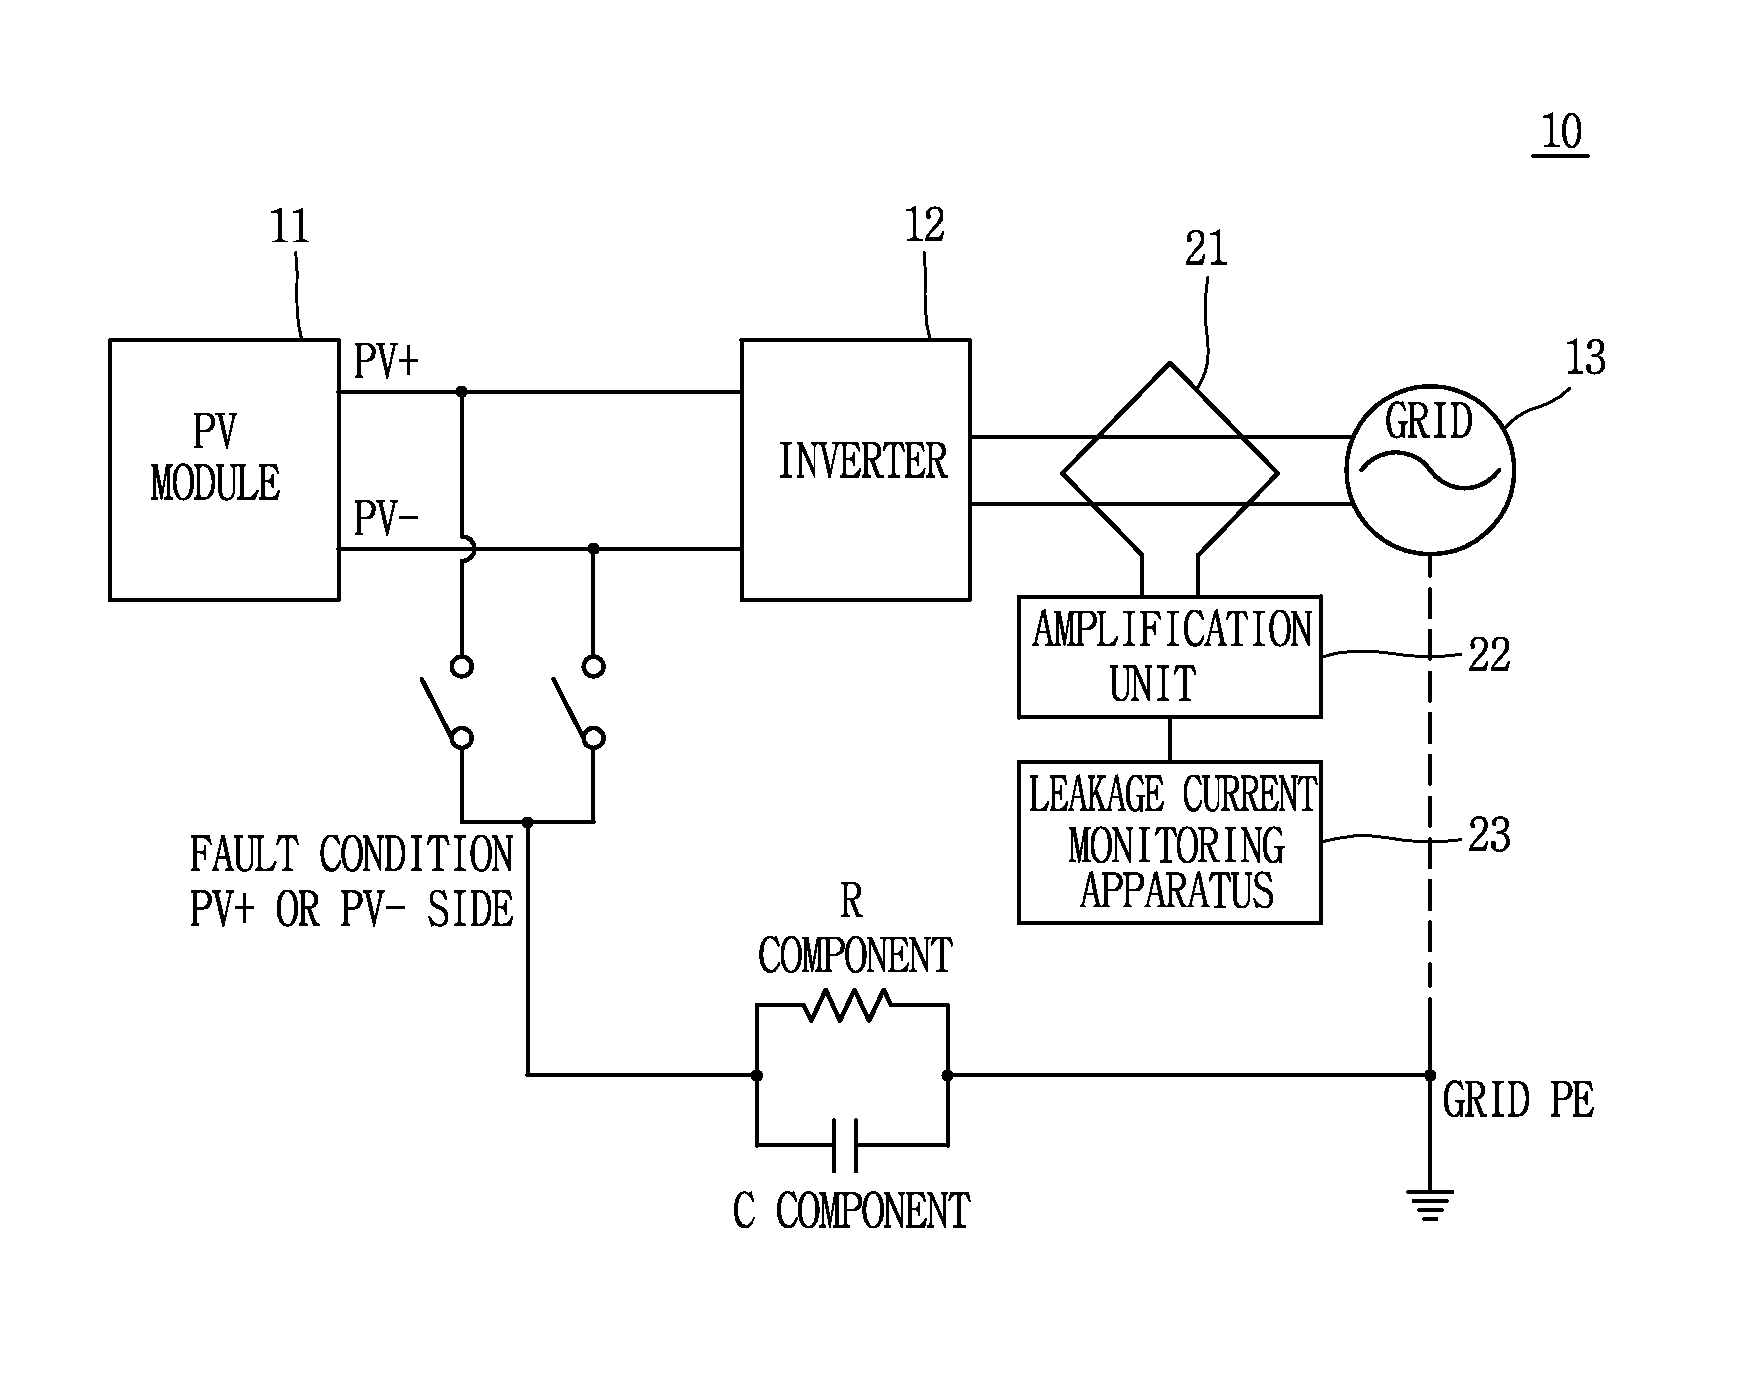 Apparatus for monitoring leakage current of transformer-less photovoltaic inverter